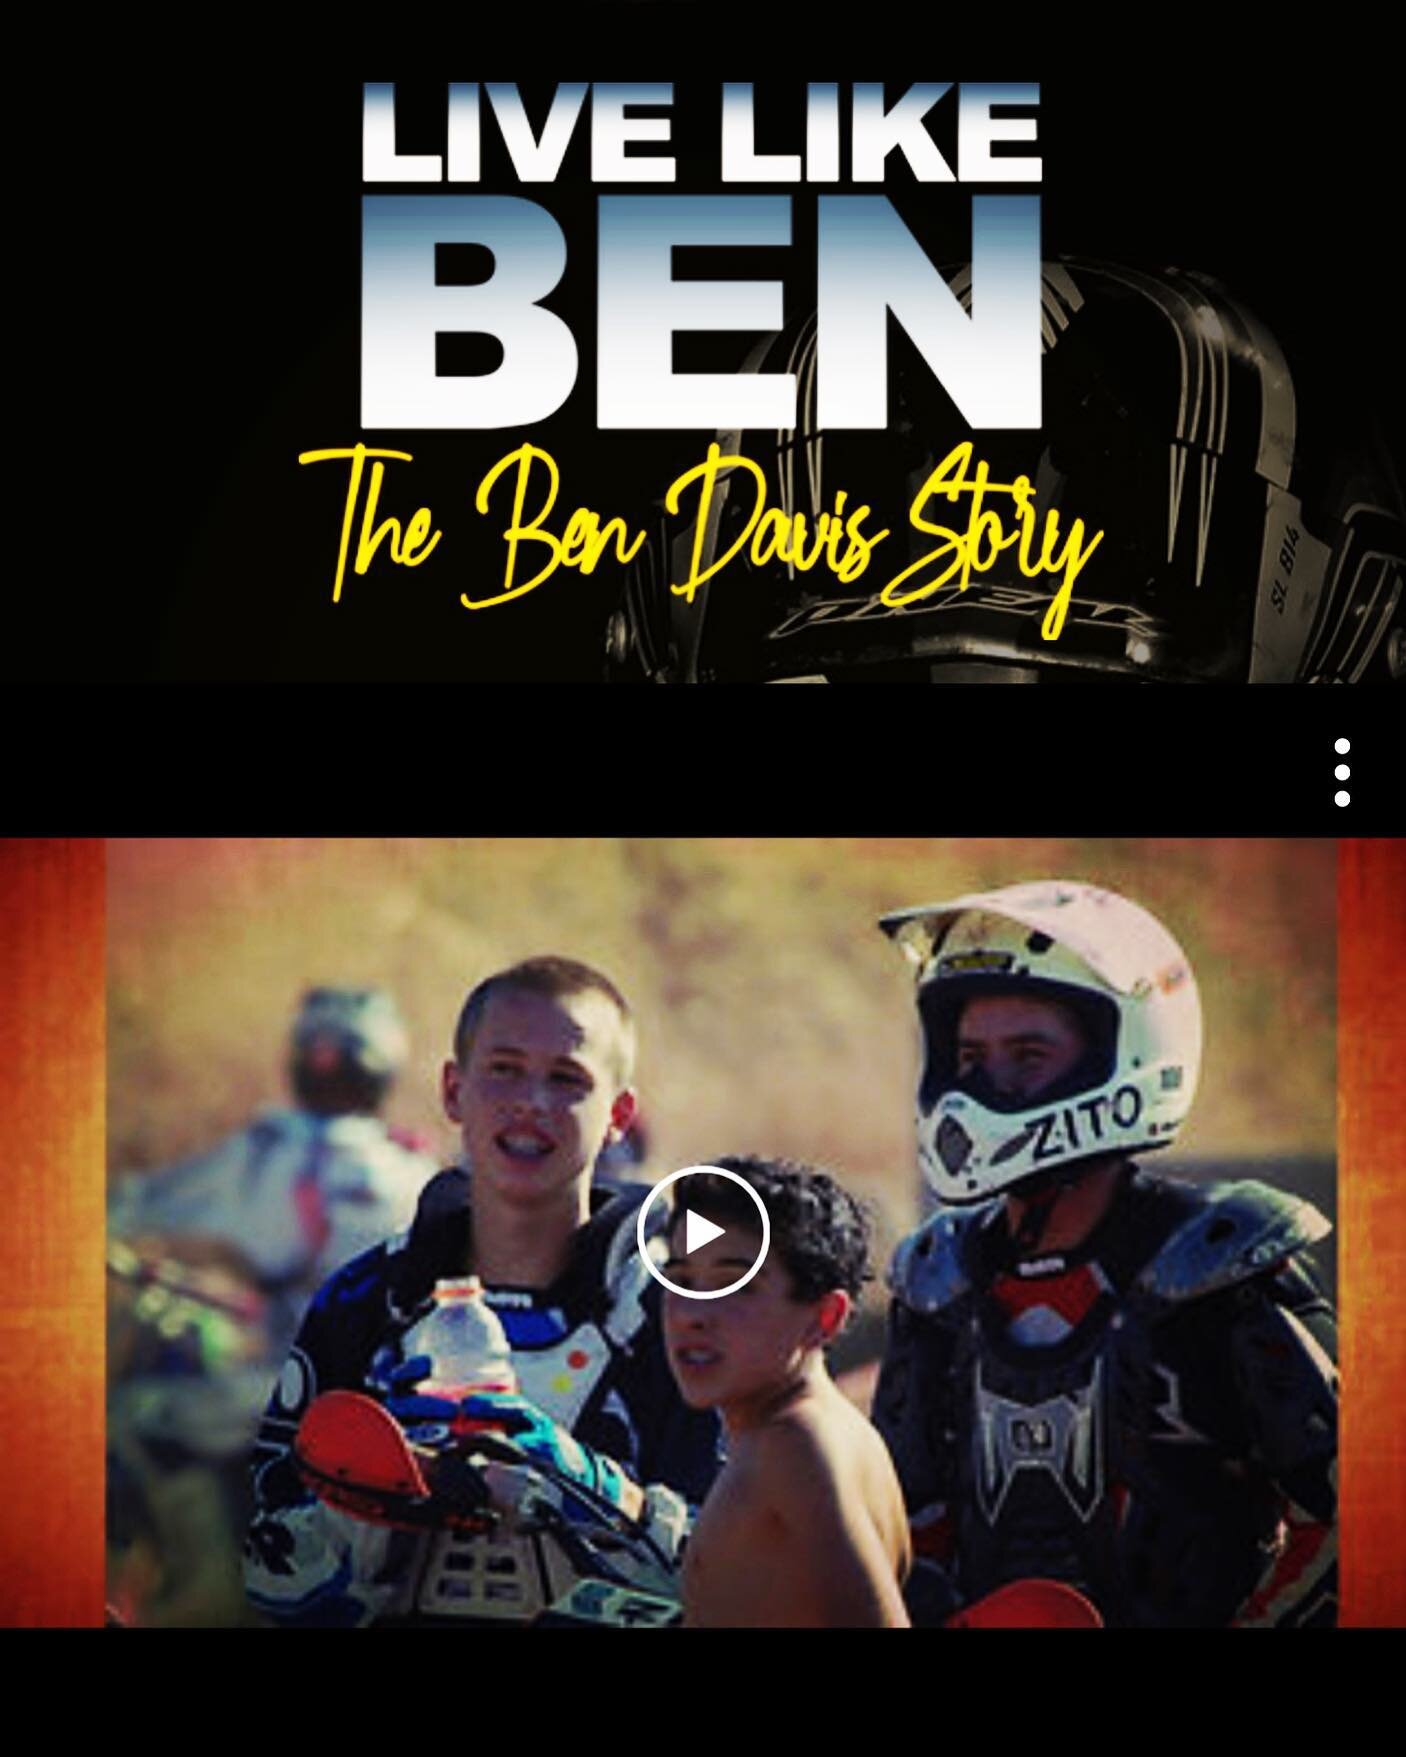 @thiss.is.will has been working on a documentary about Ben and the trailer is available now. Go check it out.